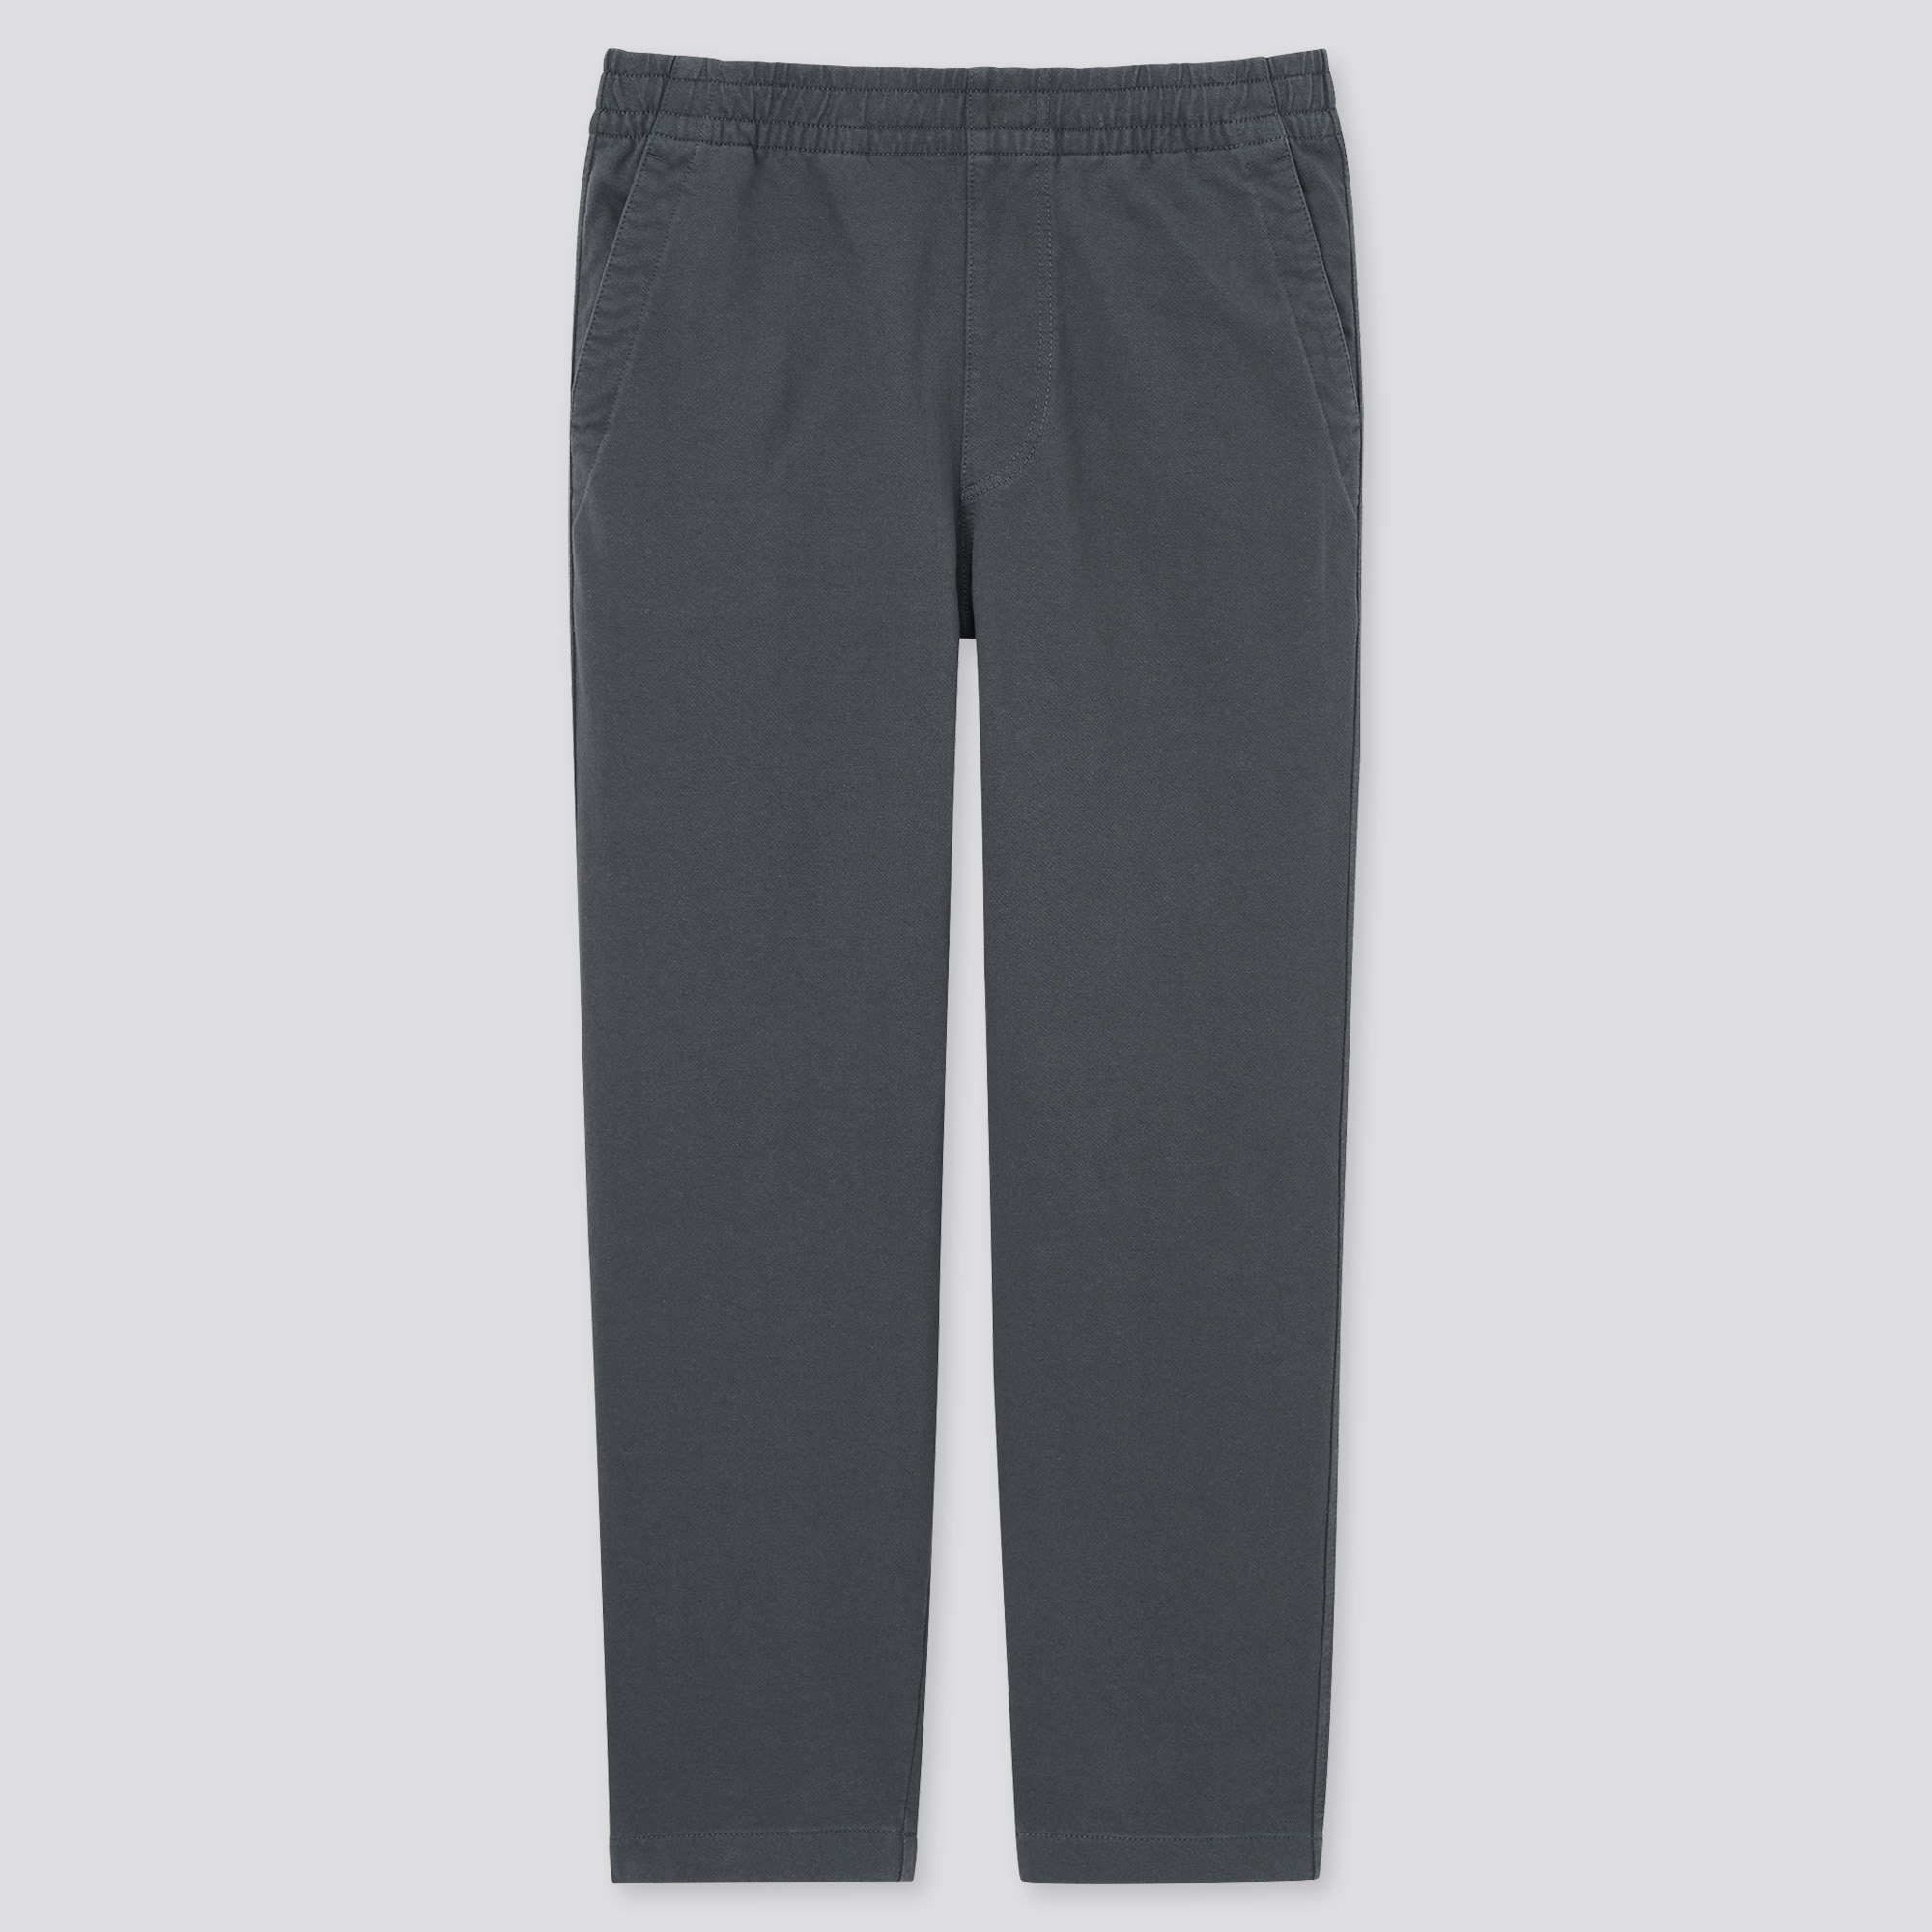 Is there a difference between jersey relaxed ankle pants and cotton relaxed  ankle pants  runiqlo